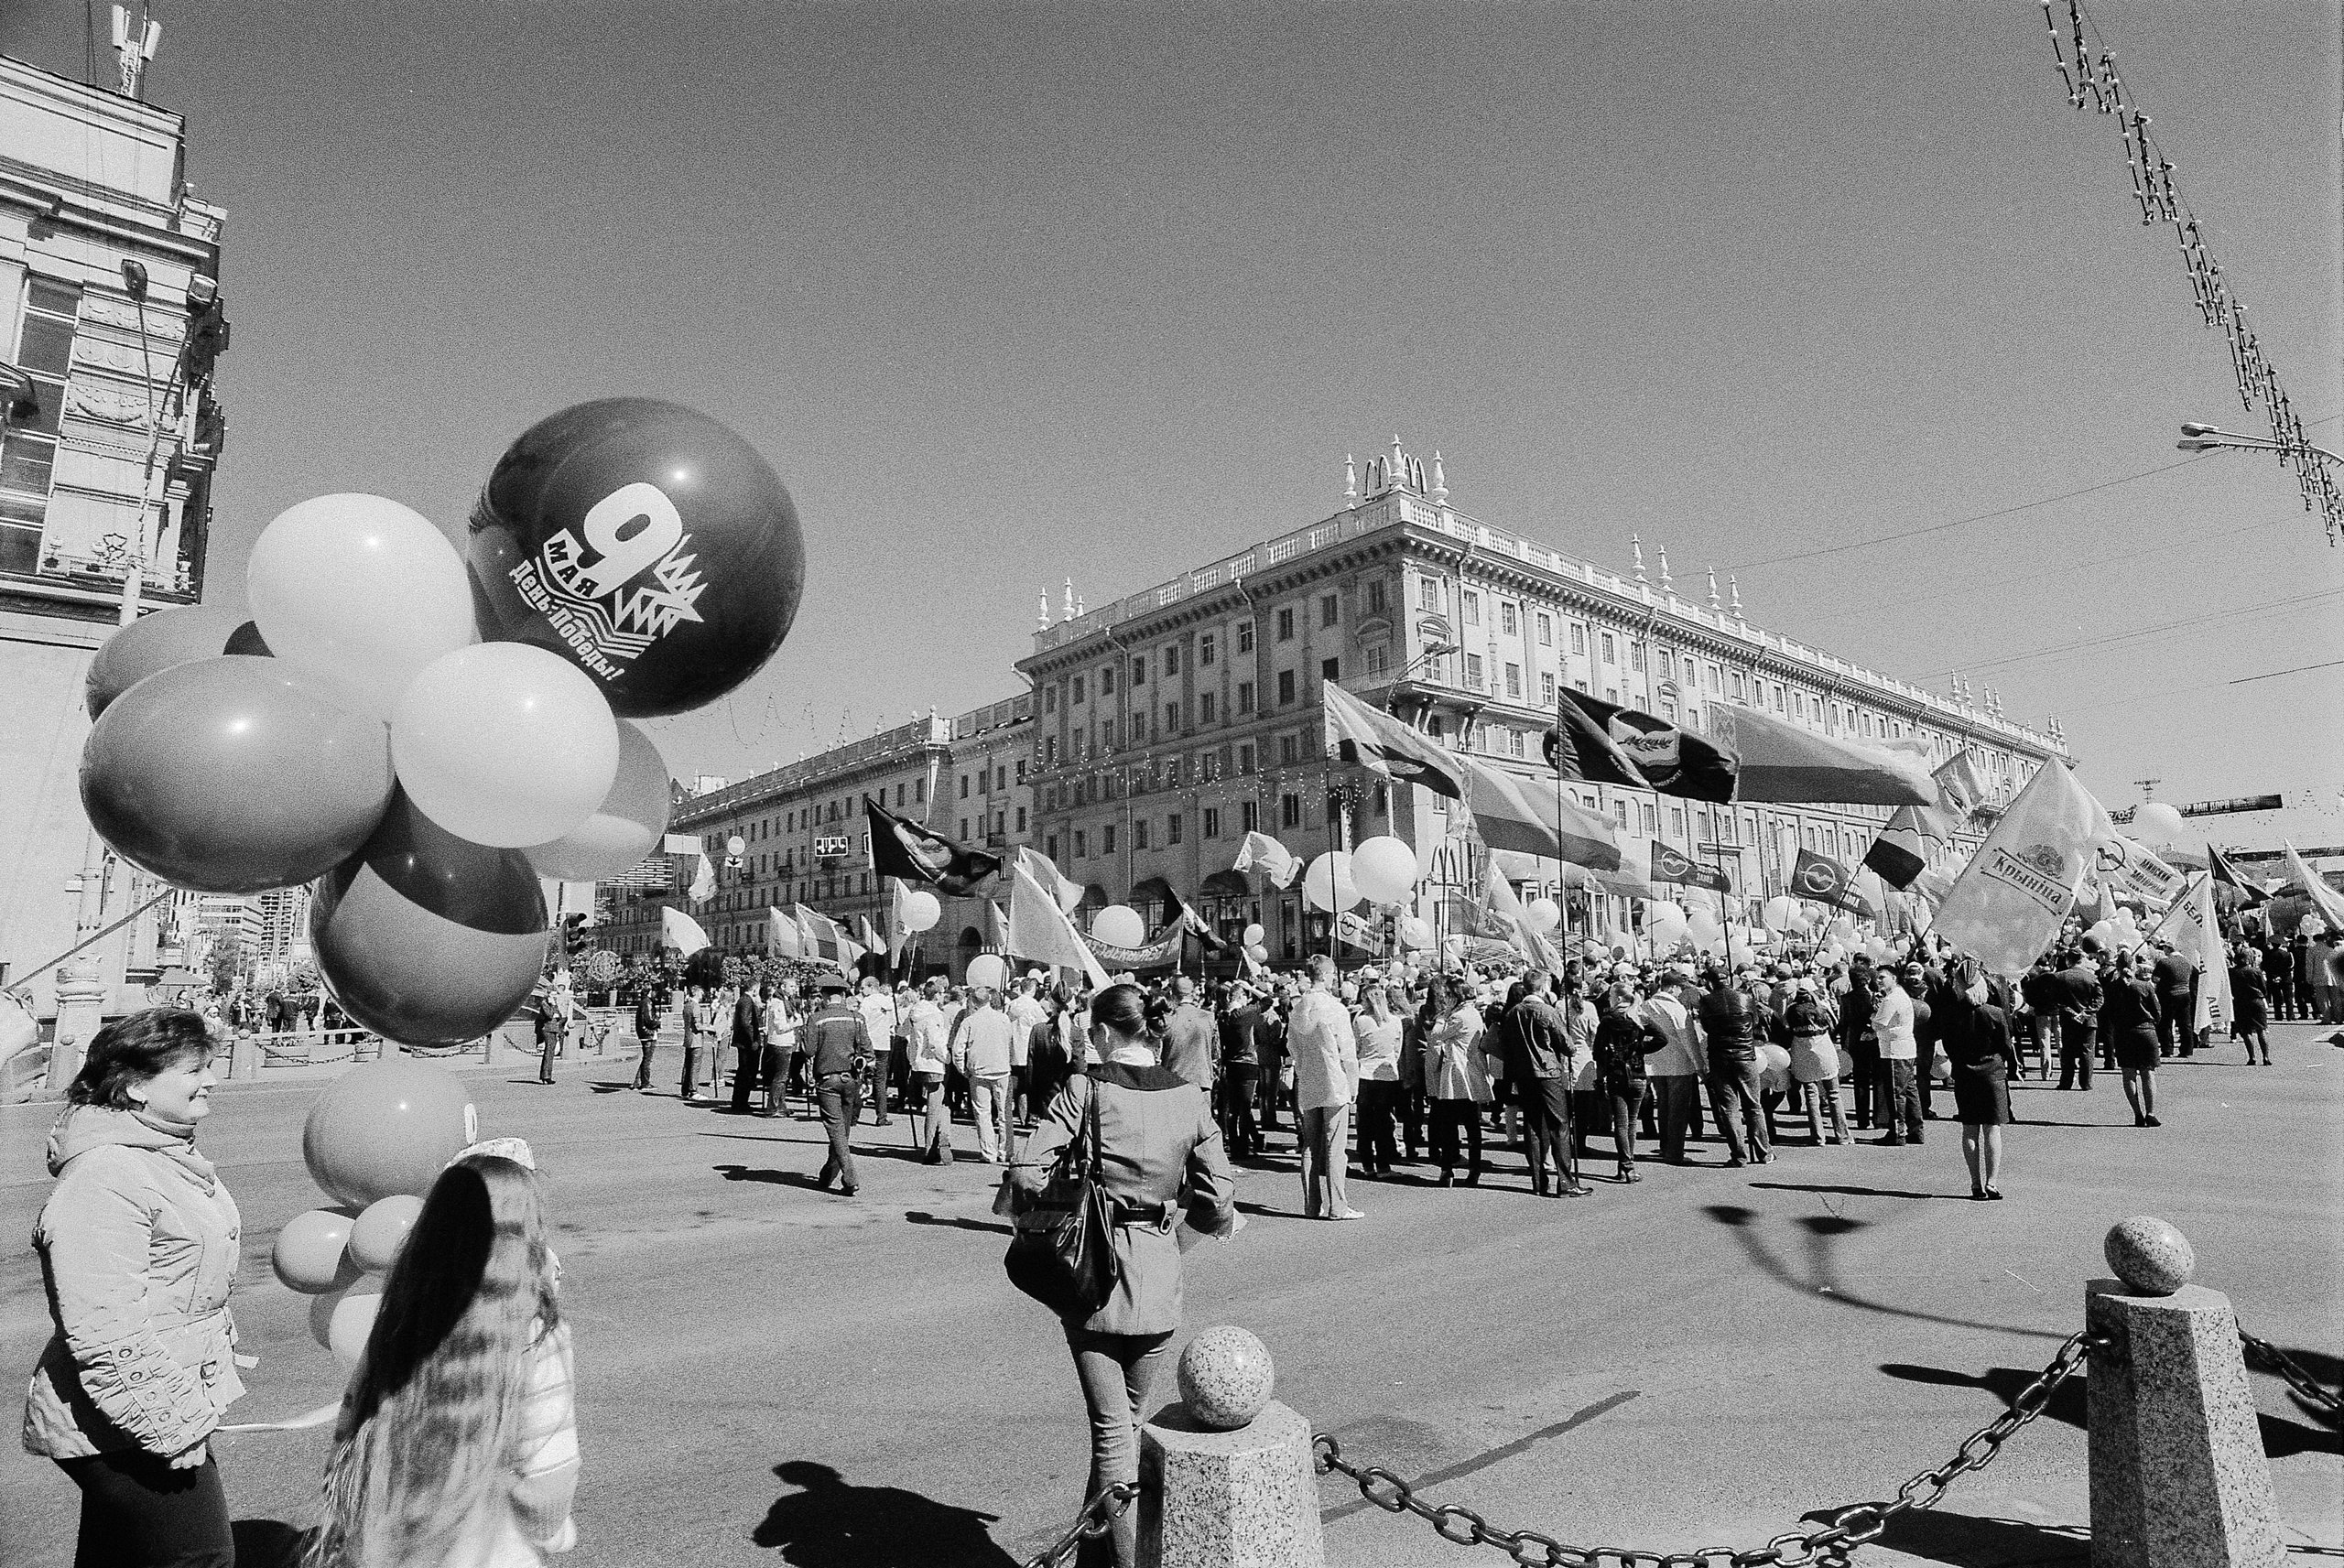 Festive procession of citizens and war veterans with balloons, flags and banners in Minsk in honor of Victory Day